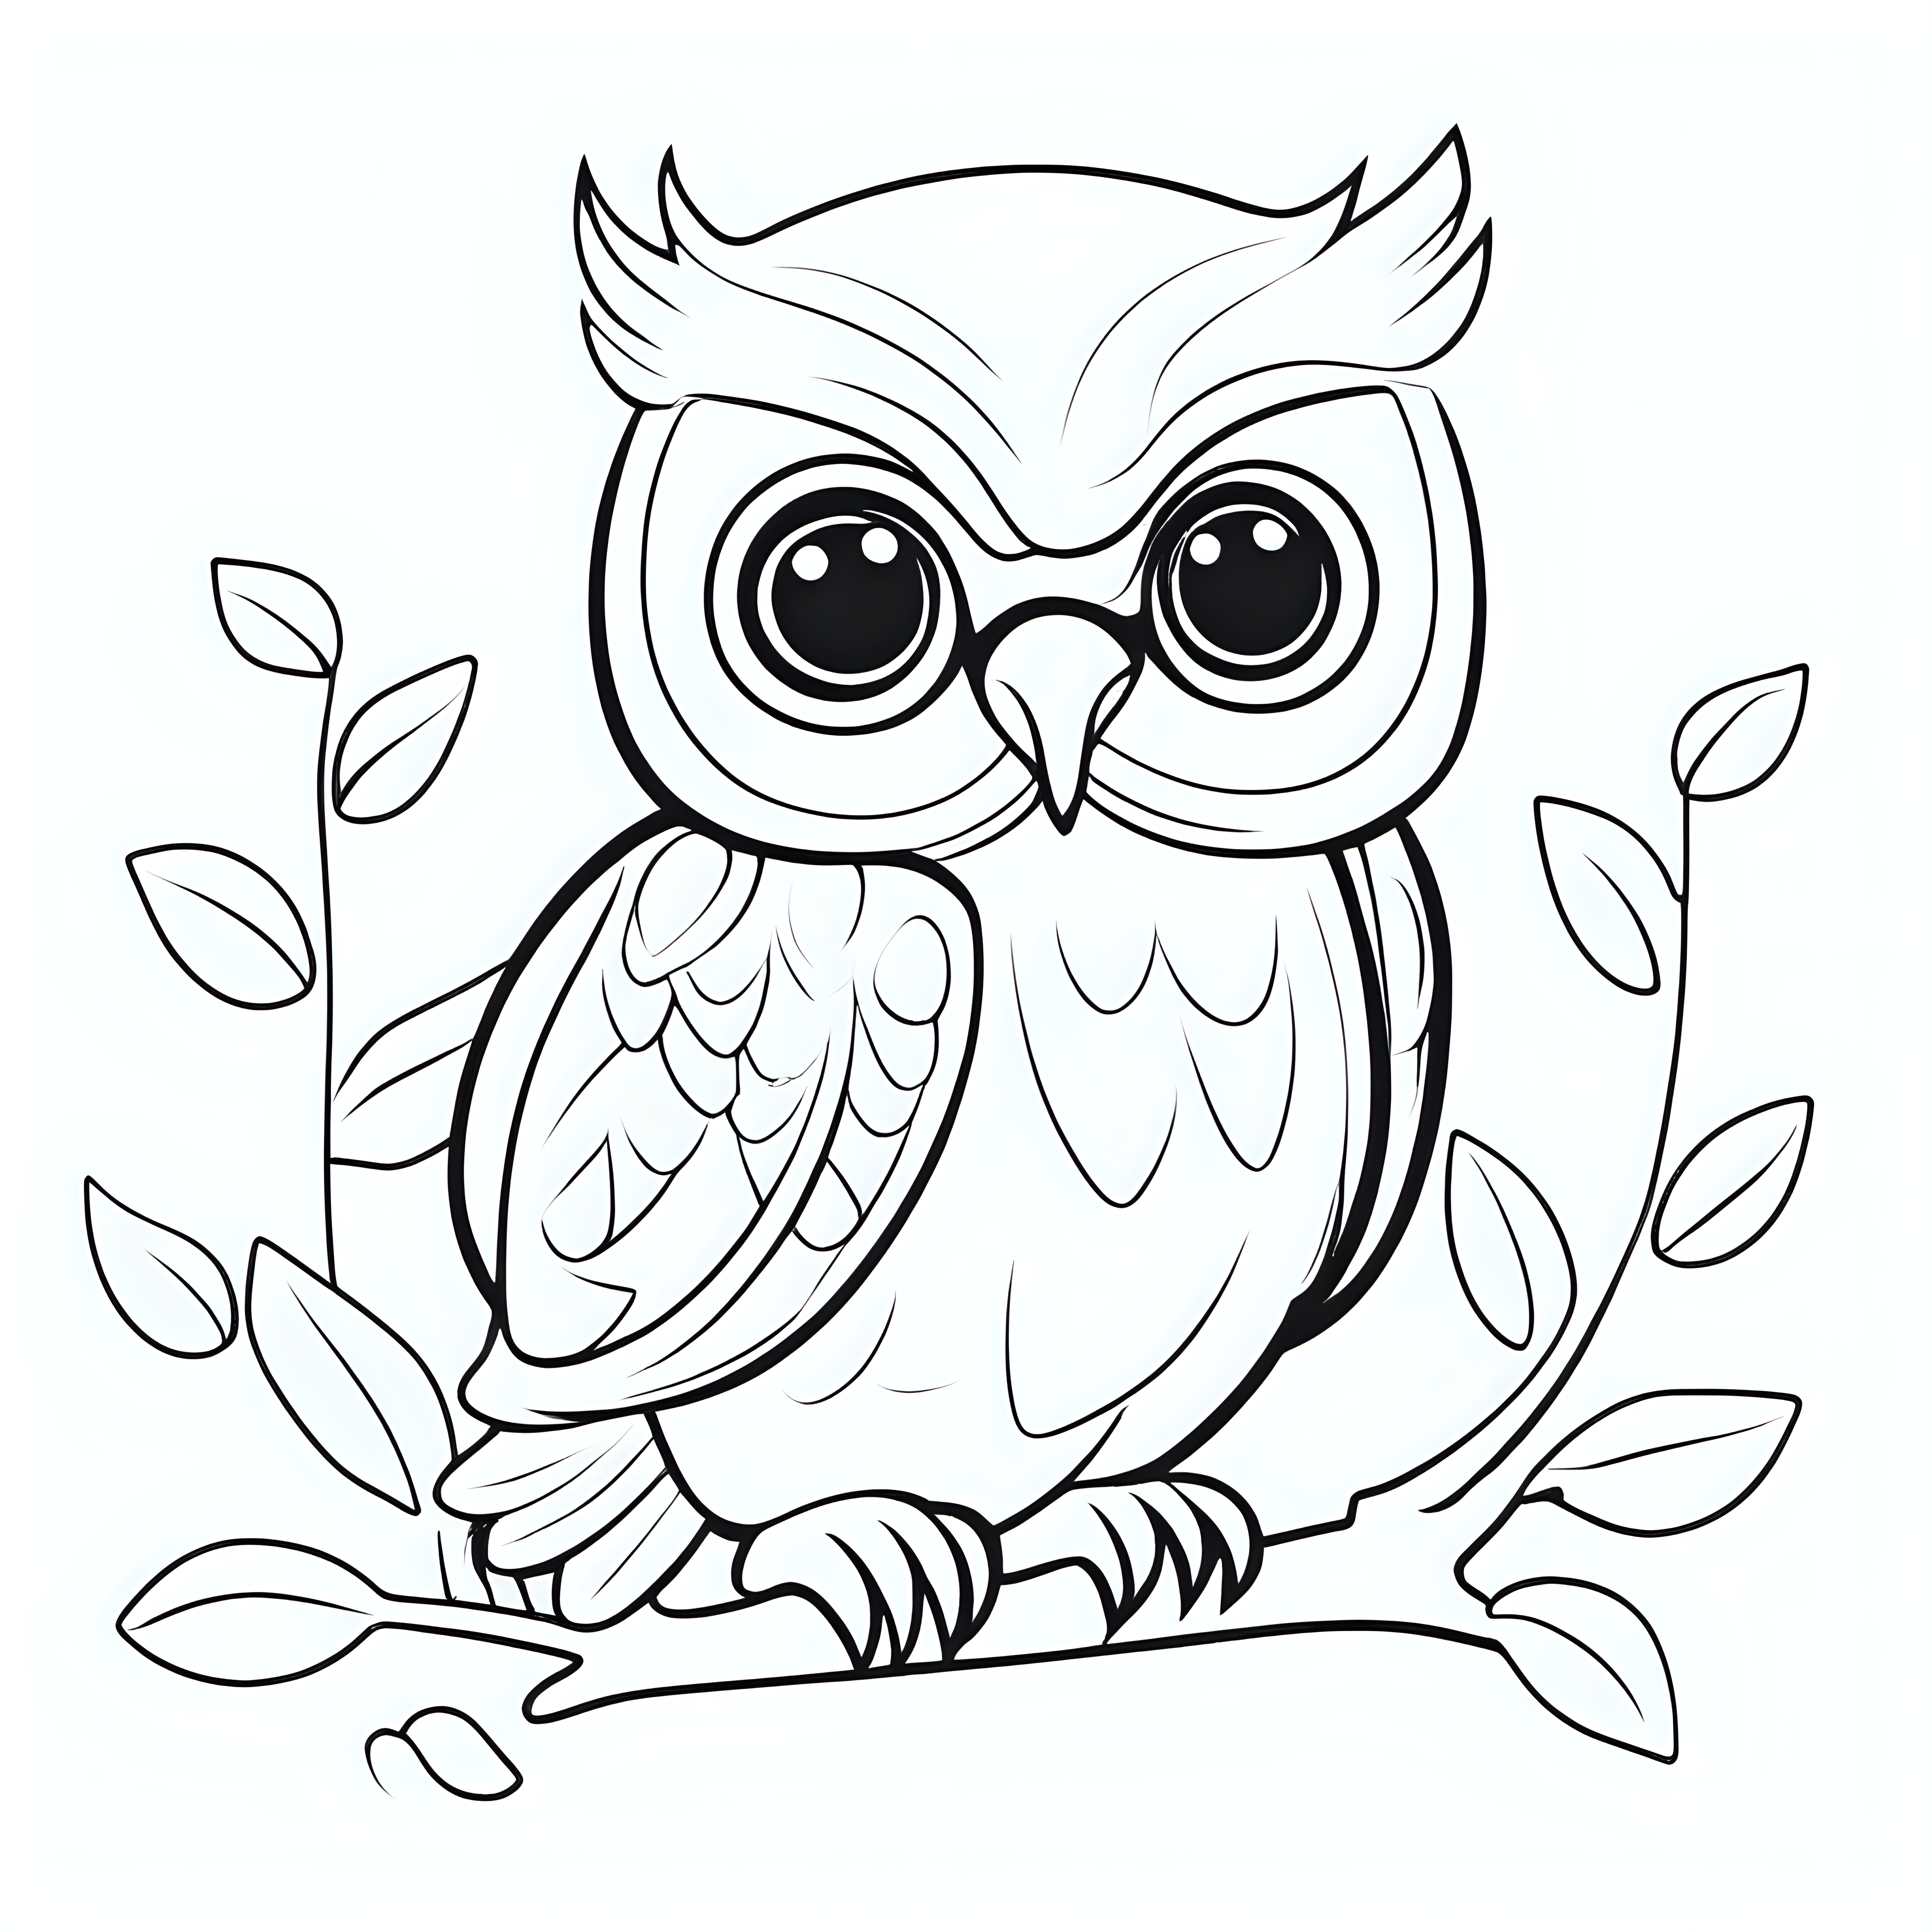 Create a cute baby owl outline in black